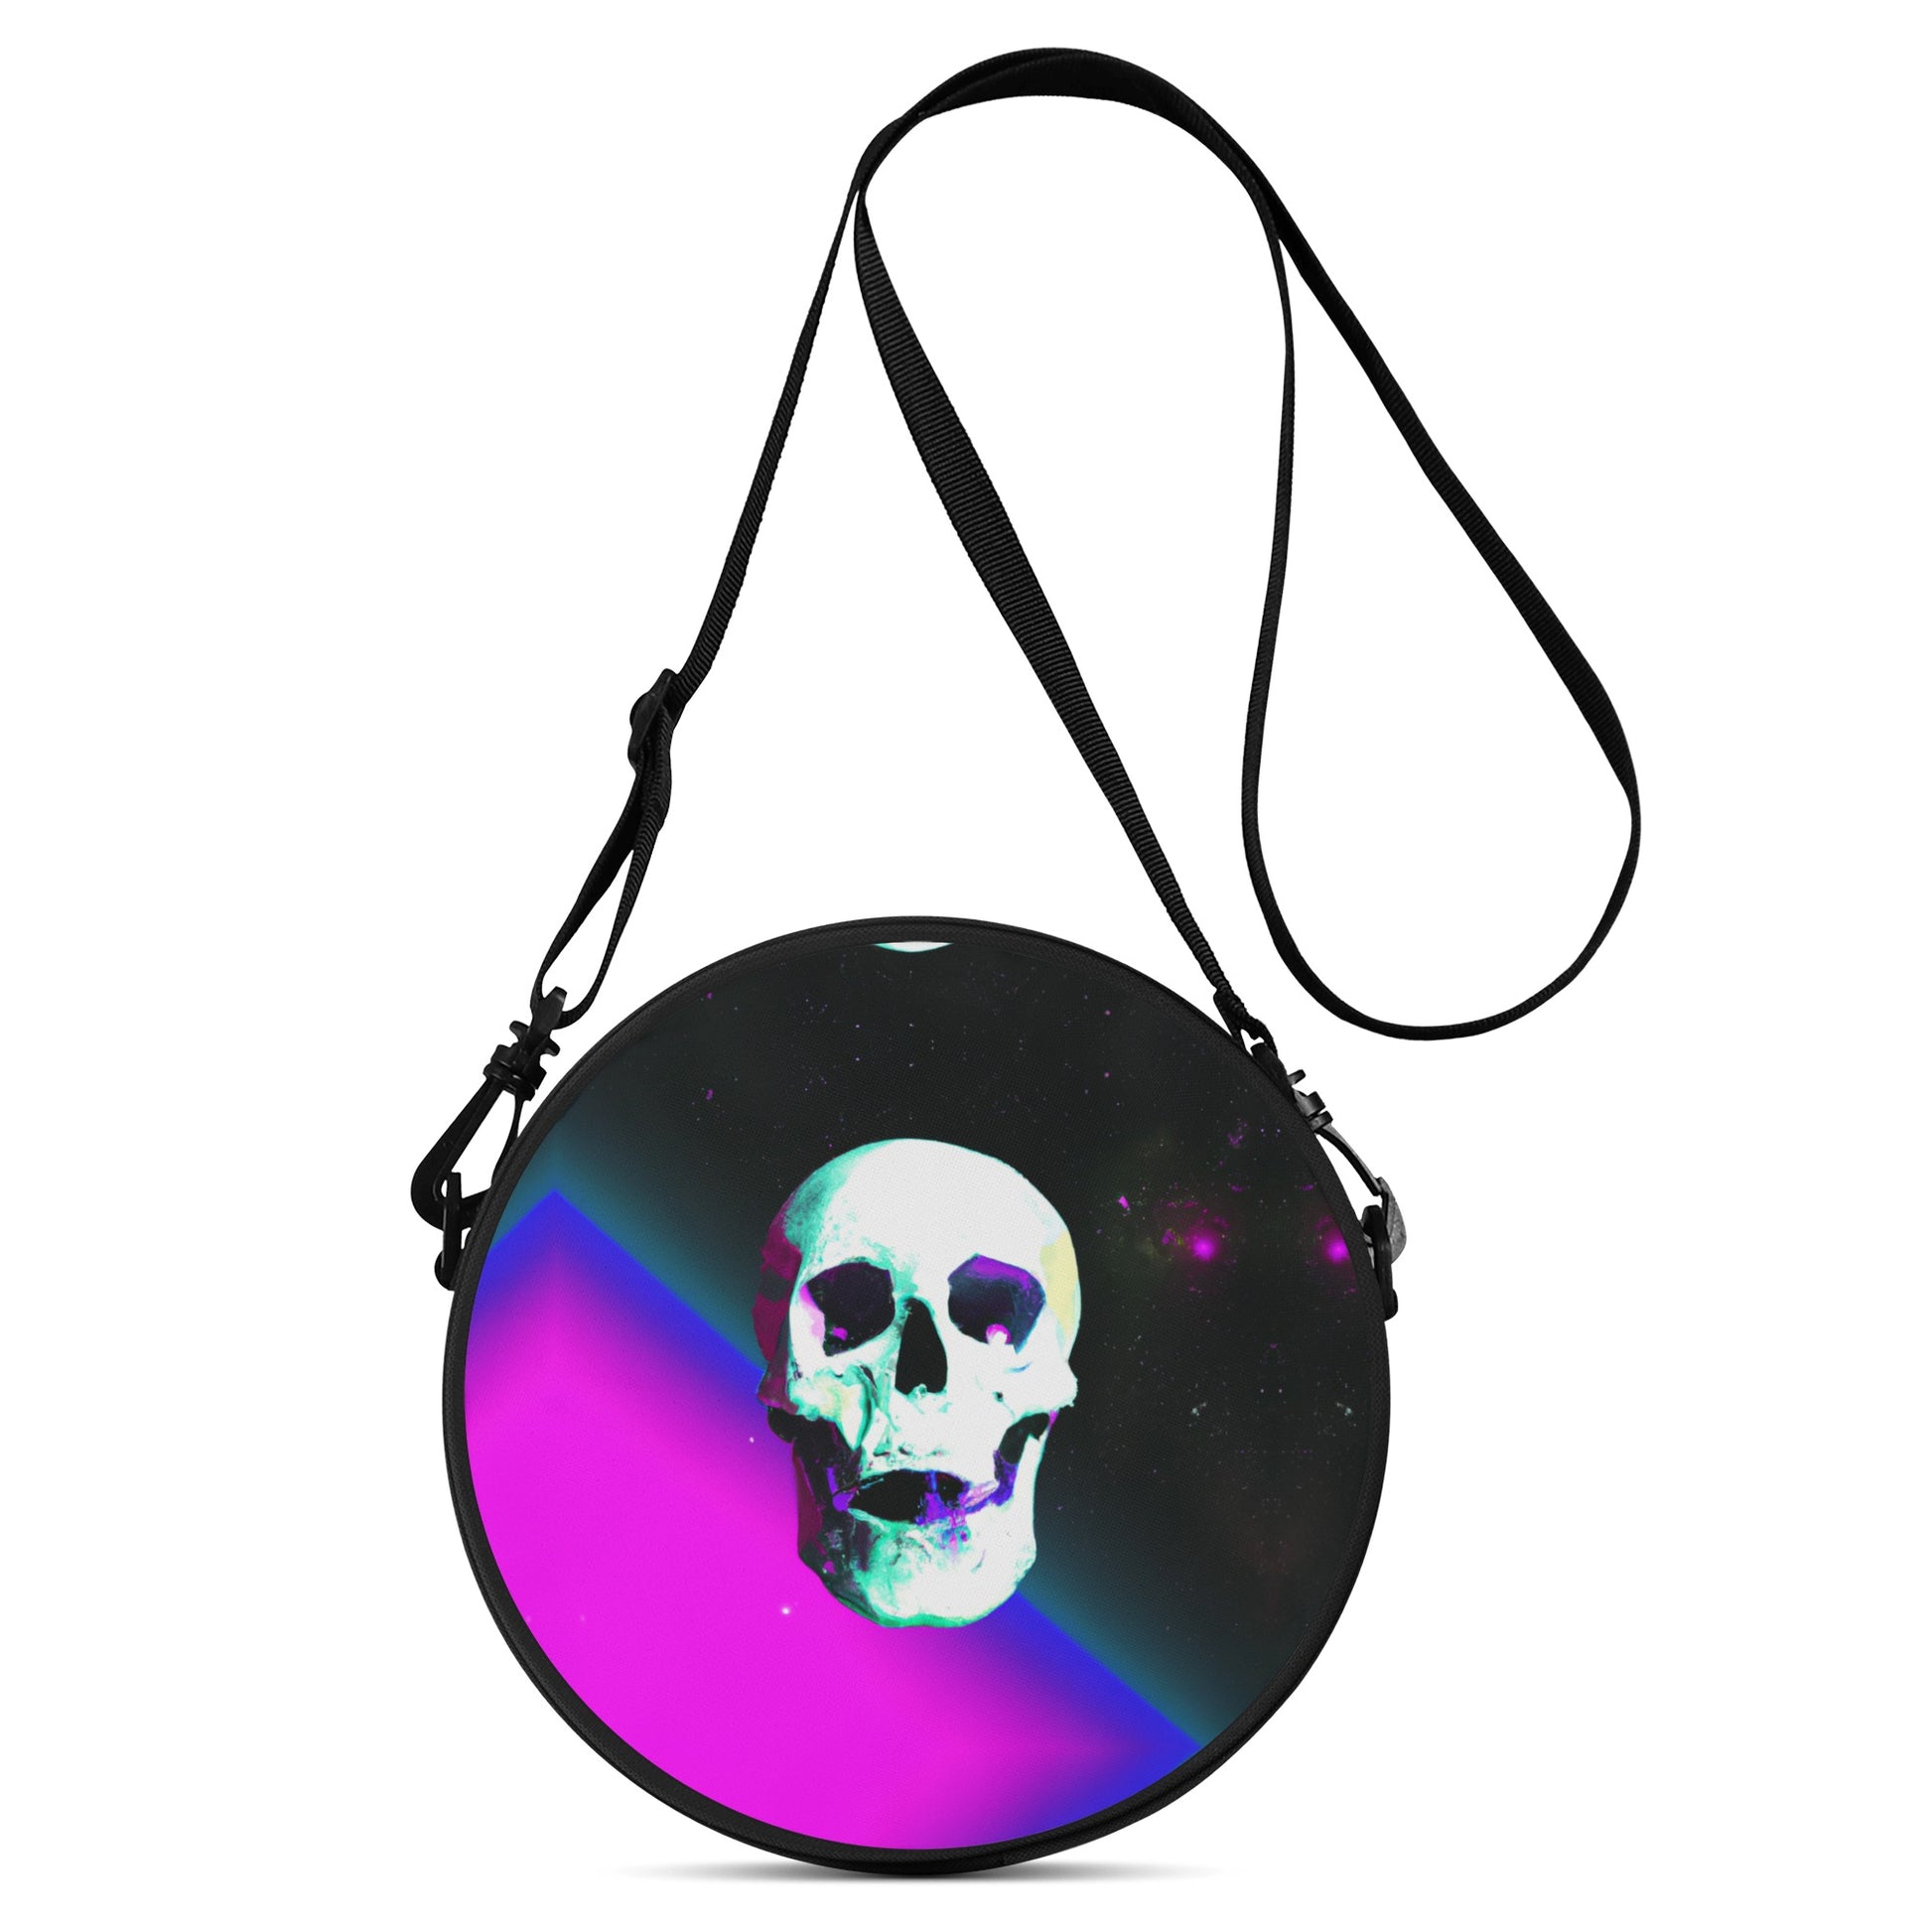 Rock this bold round satchel bag with its sick digital print - a skull in a daring nebula space scene.